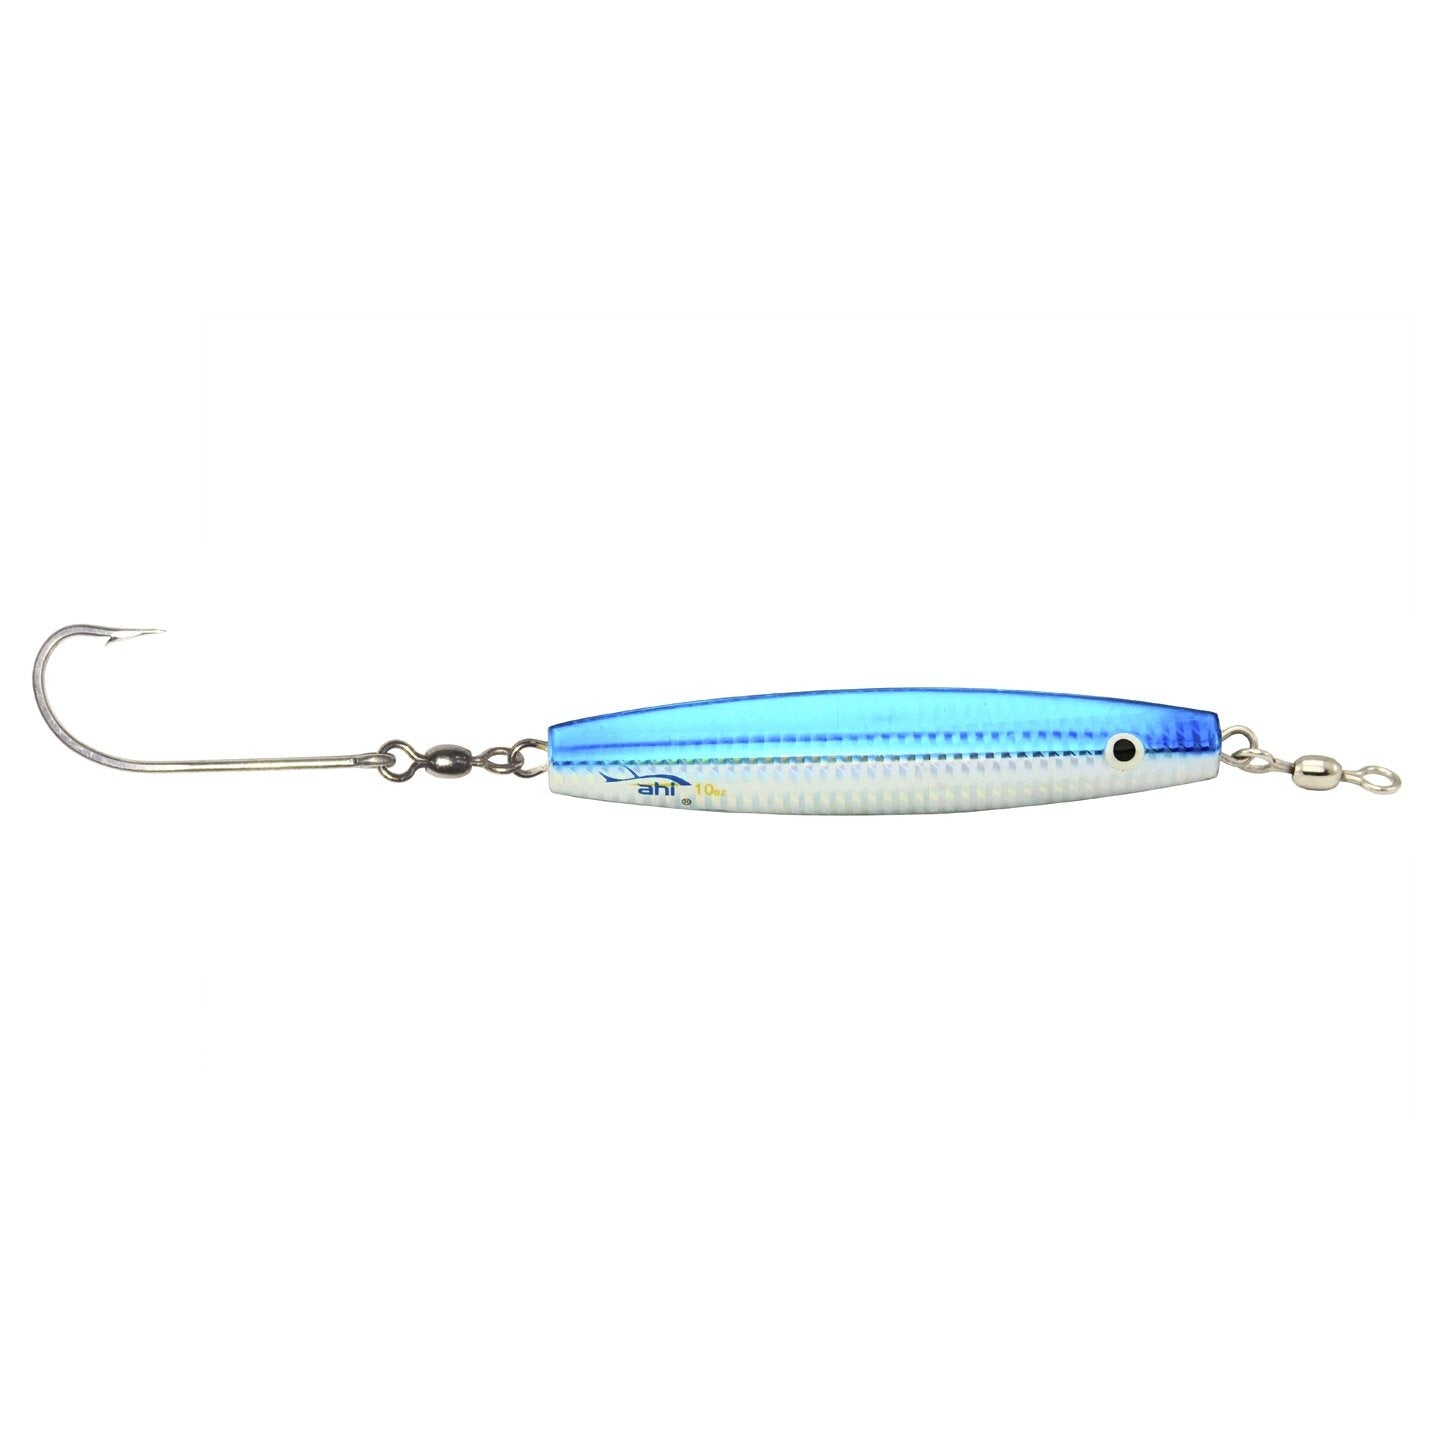 Crazy Gear Viking Jig (Stainless Steel) with Treble Hook 16 oz.